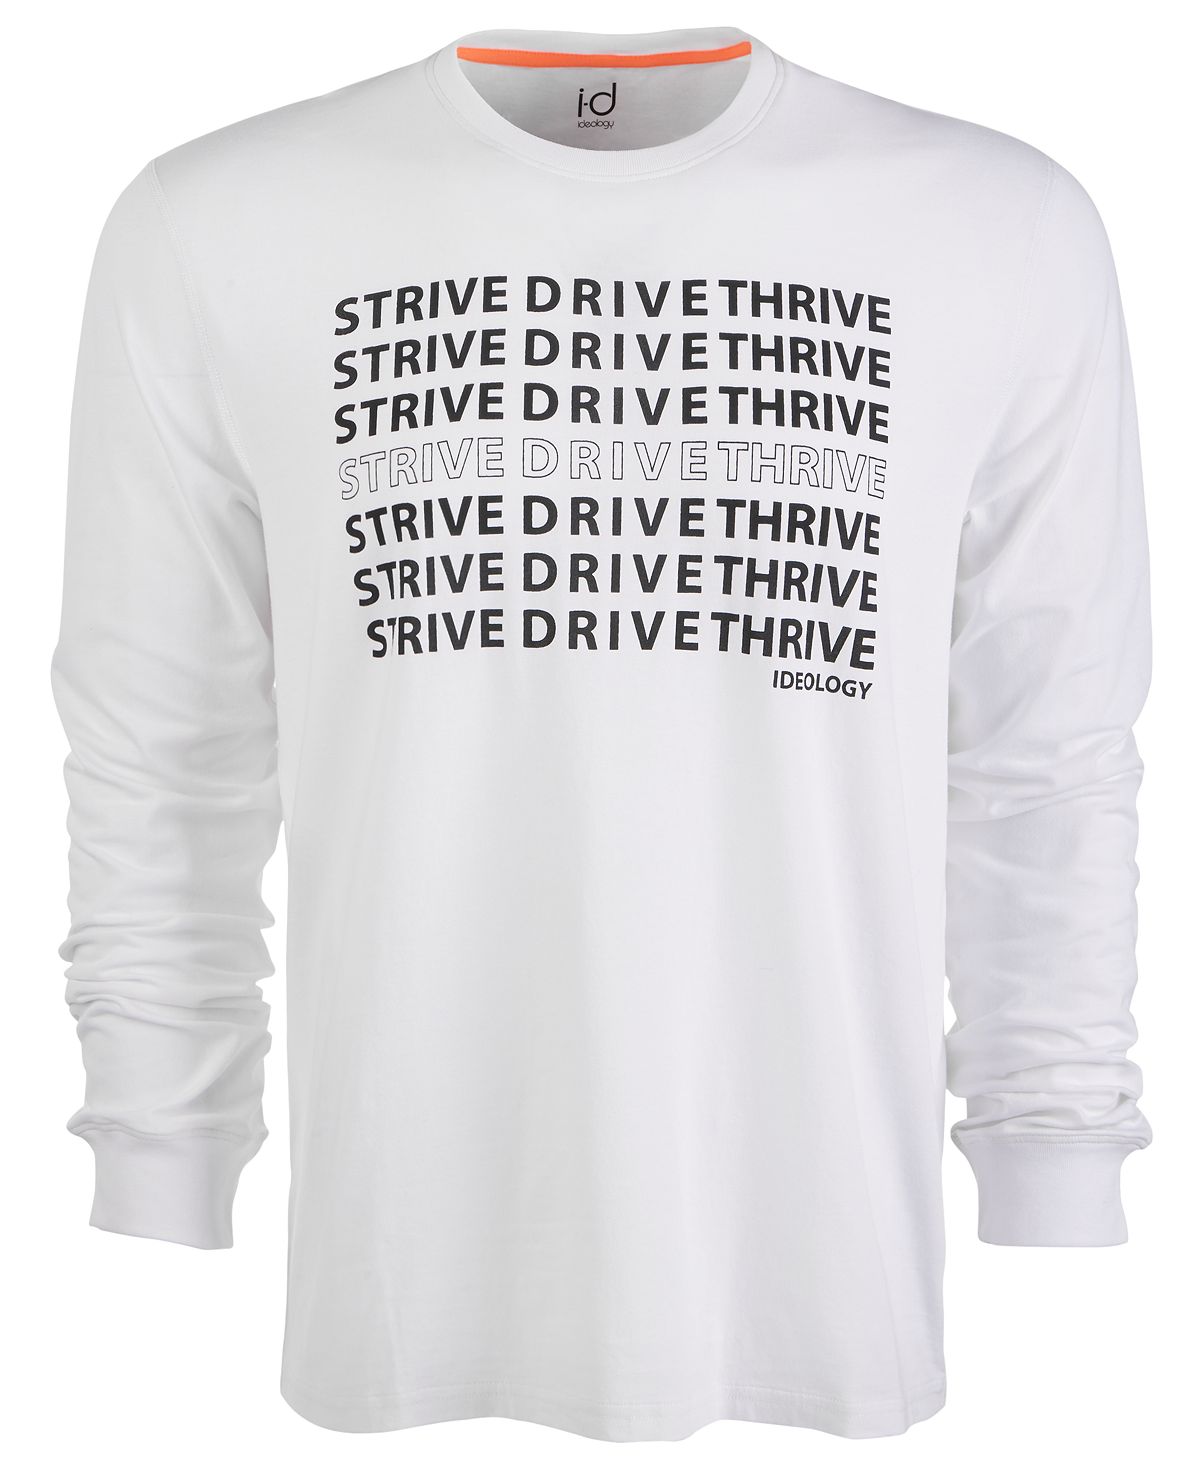 Ideology Id Strive Drive Thrive Tee Bright White